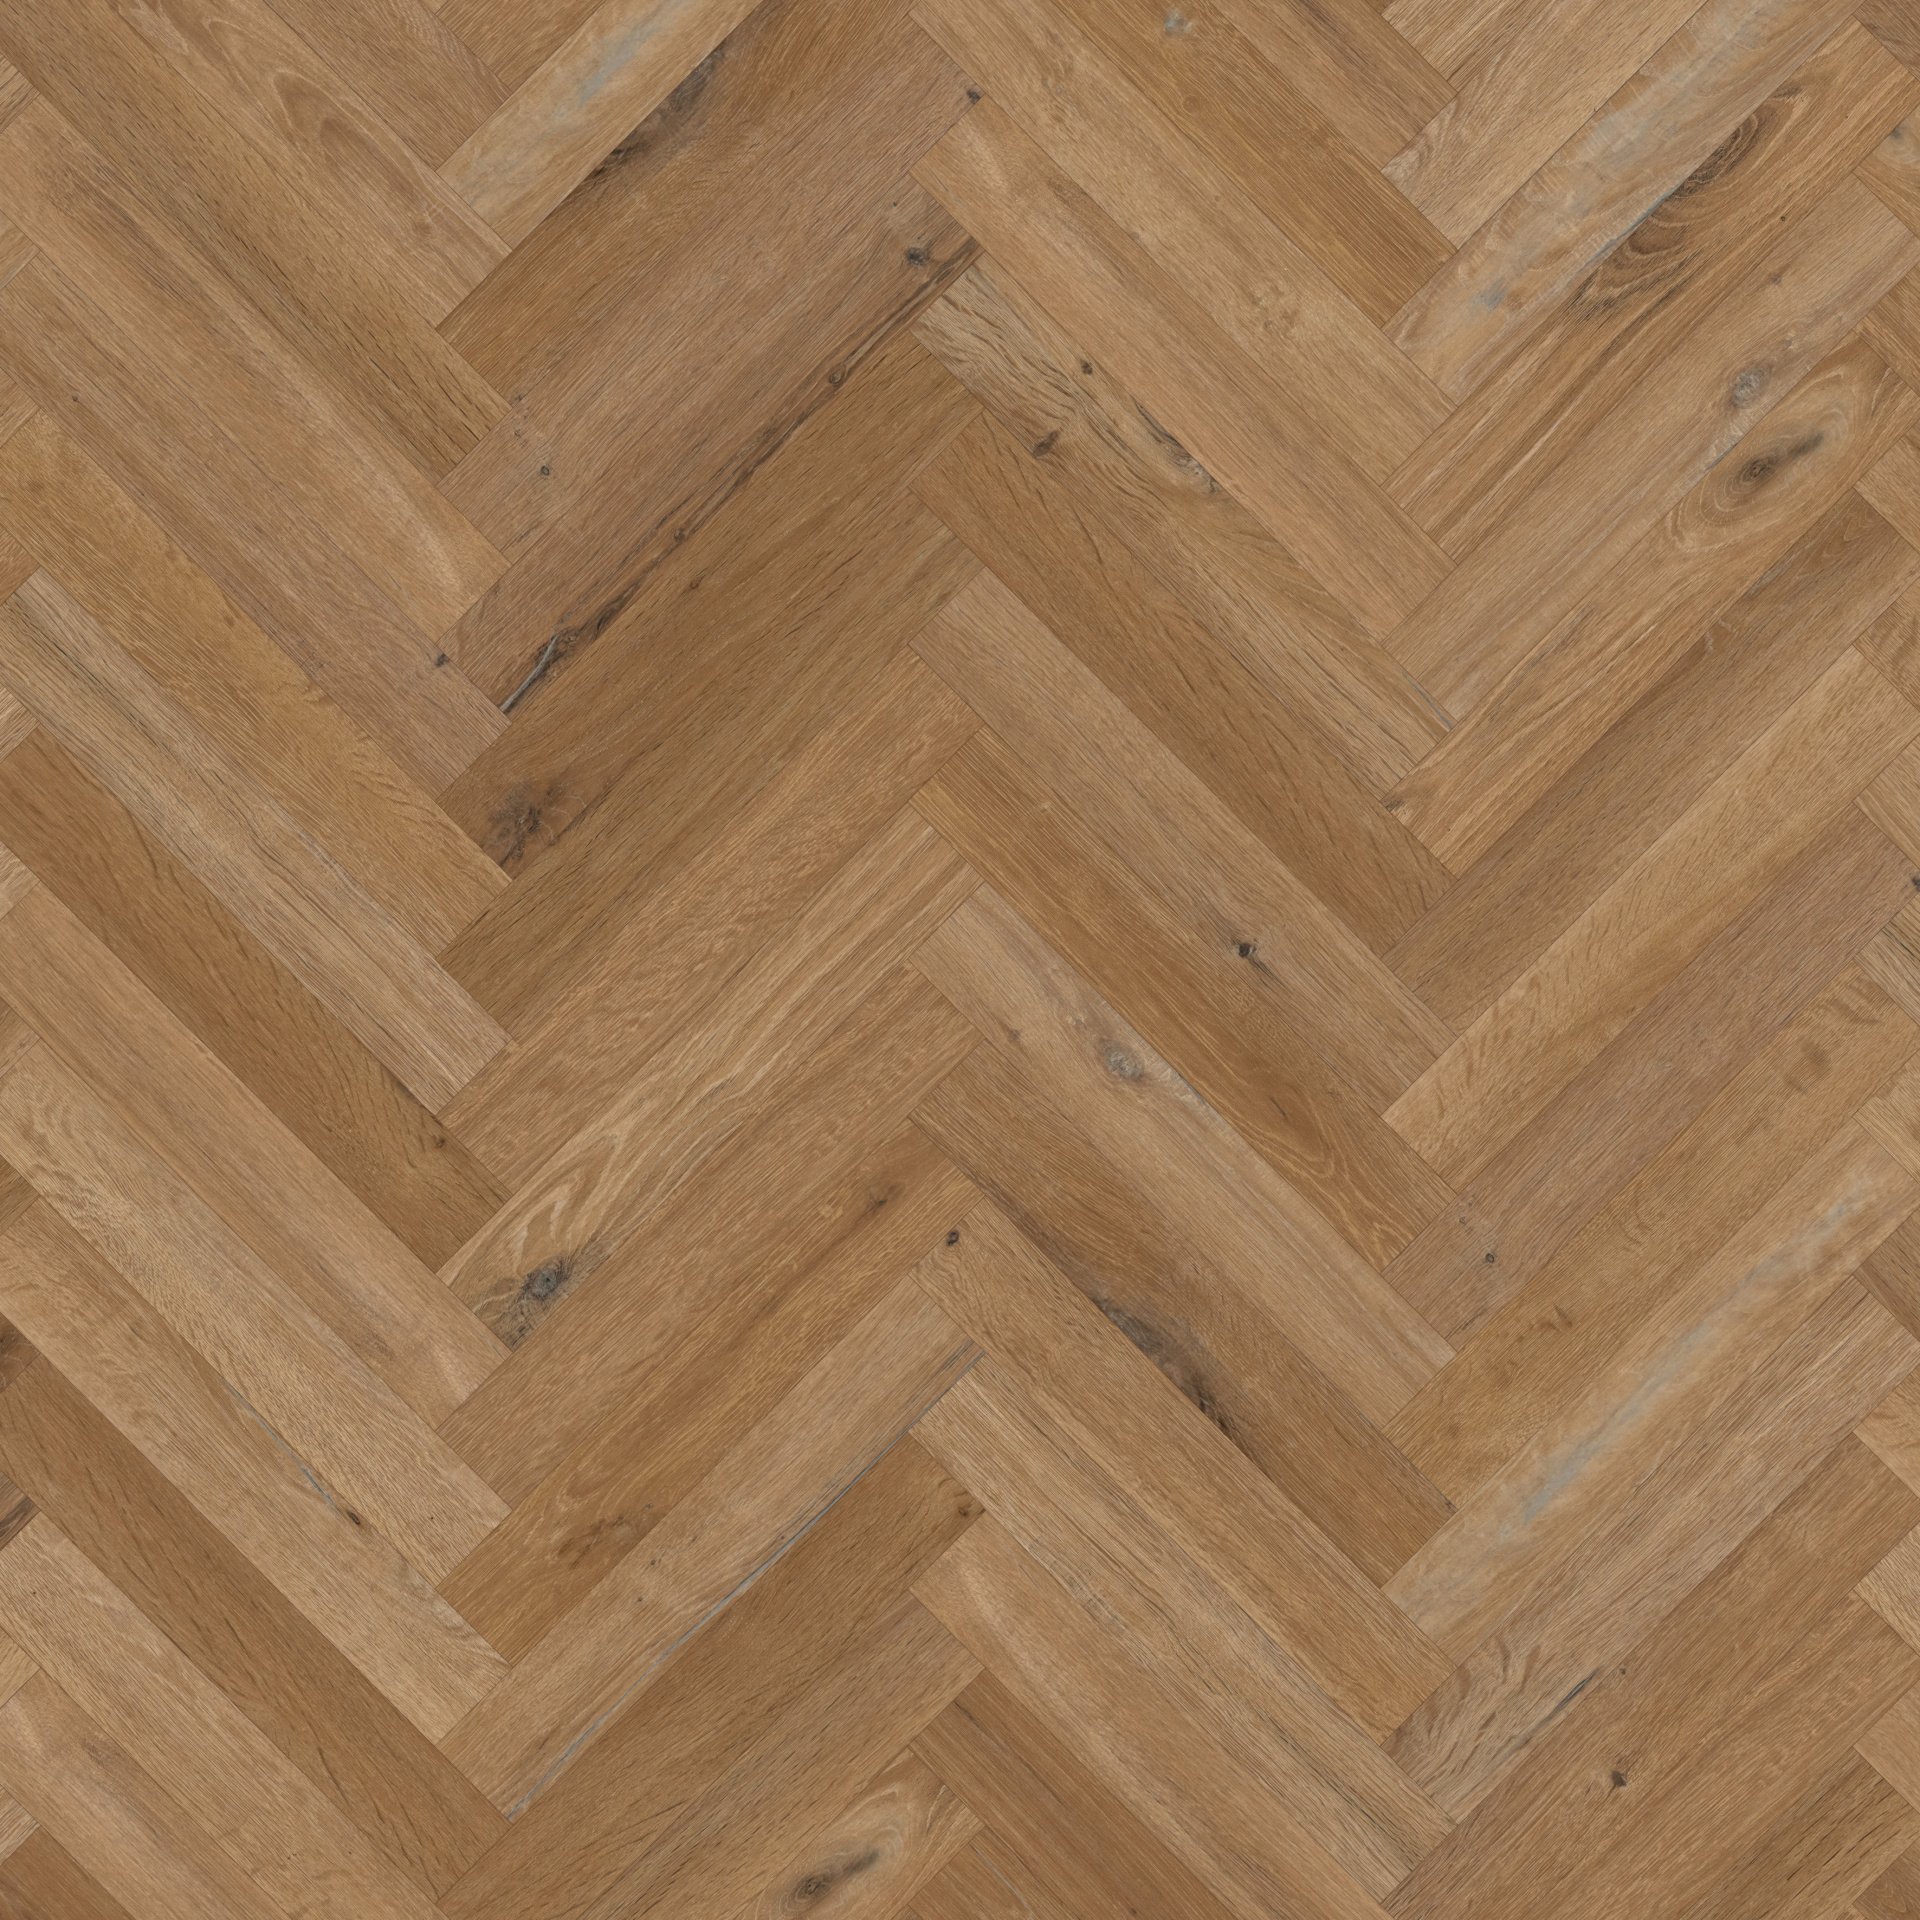 Karndean Knight Tile - Traditional Character Oak SM-KP146 Safety Flooring